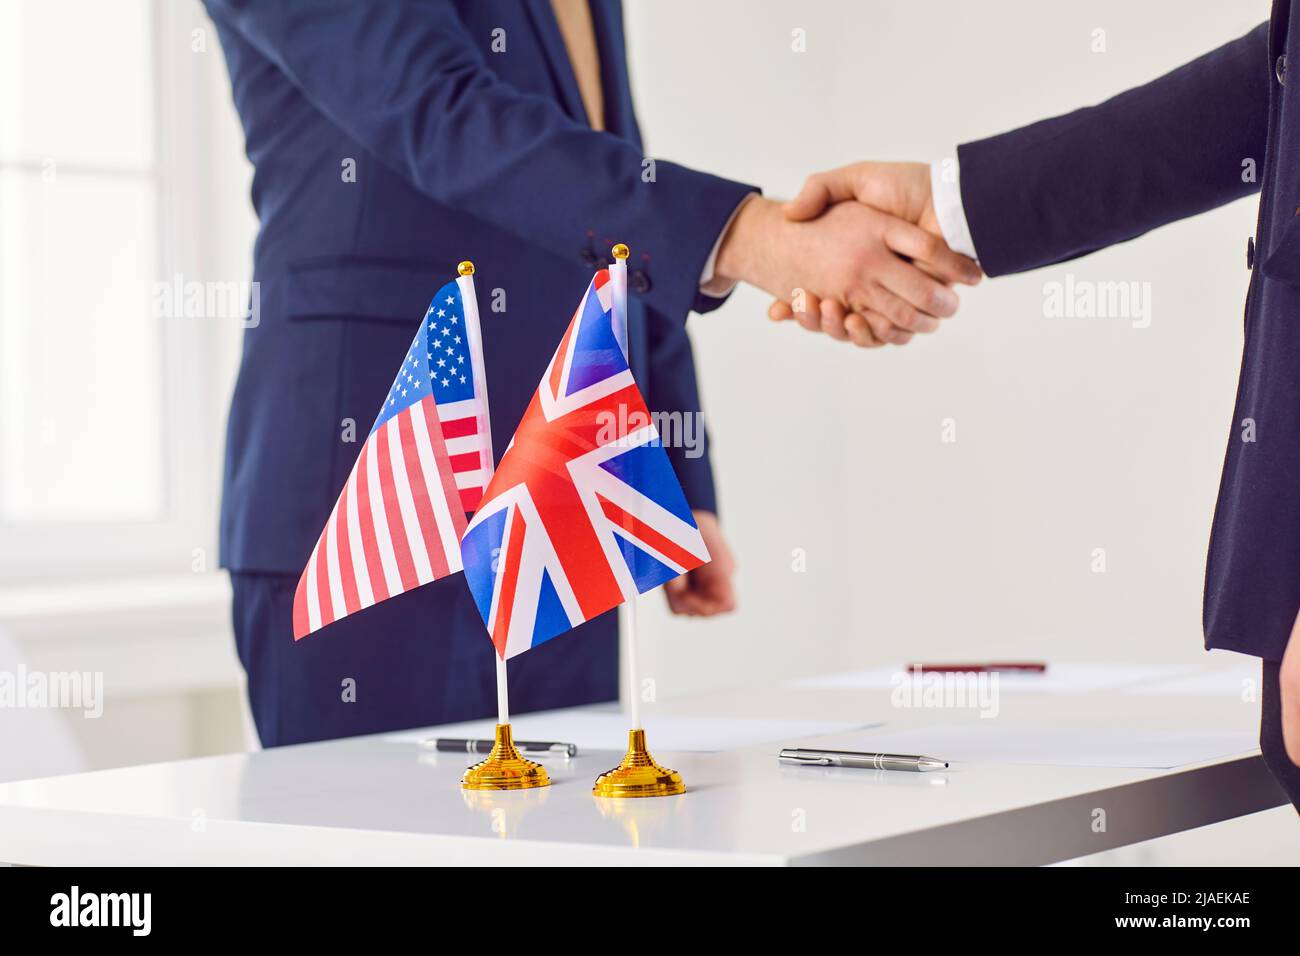 Diplomats from USA and UK meet for negotiations, reach trade agreement and shake hands Stock Photo